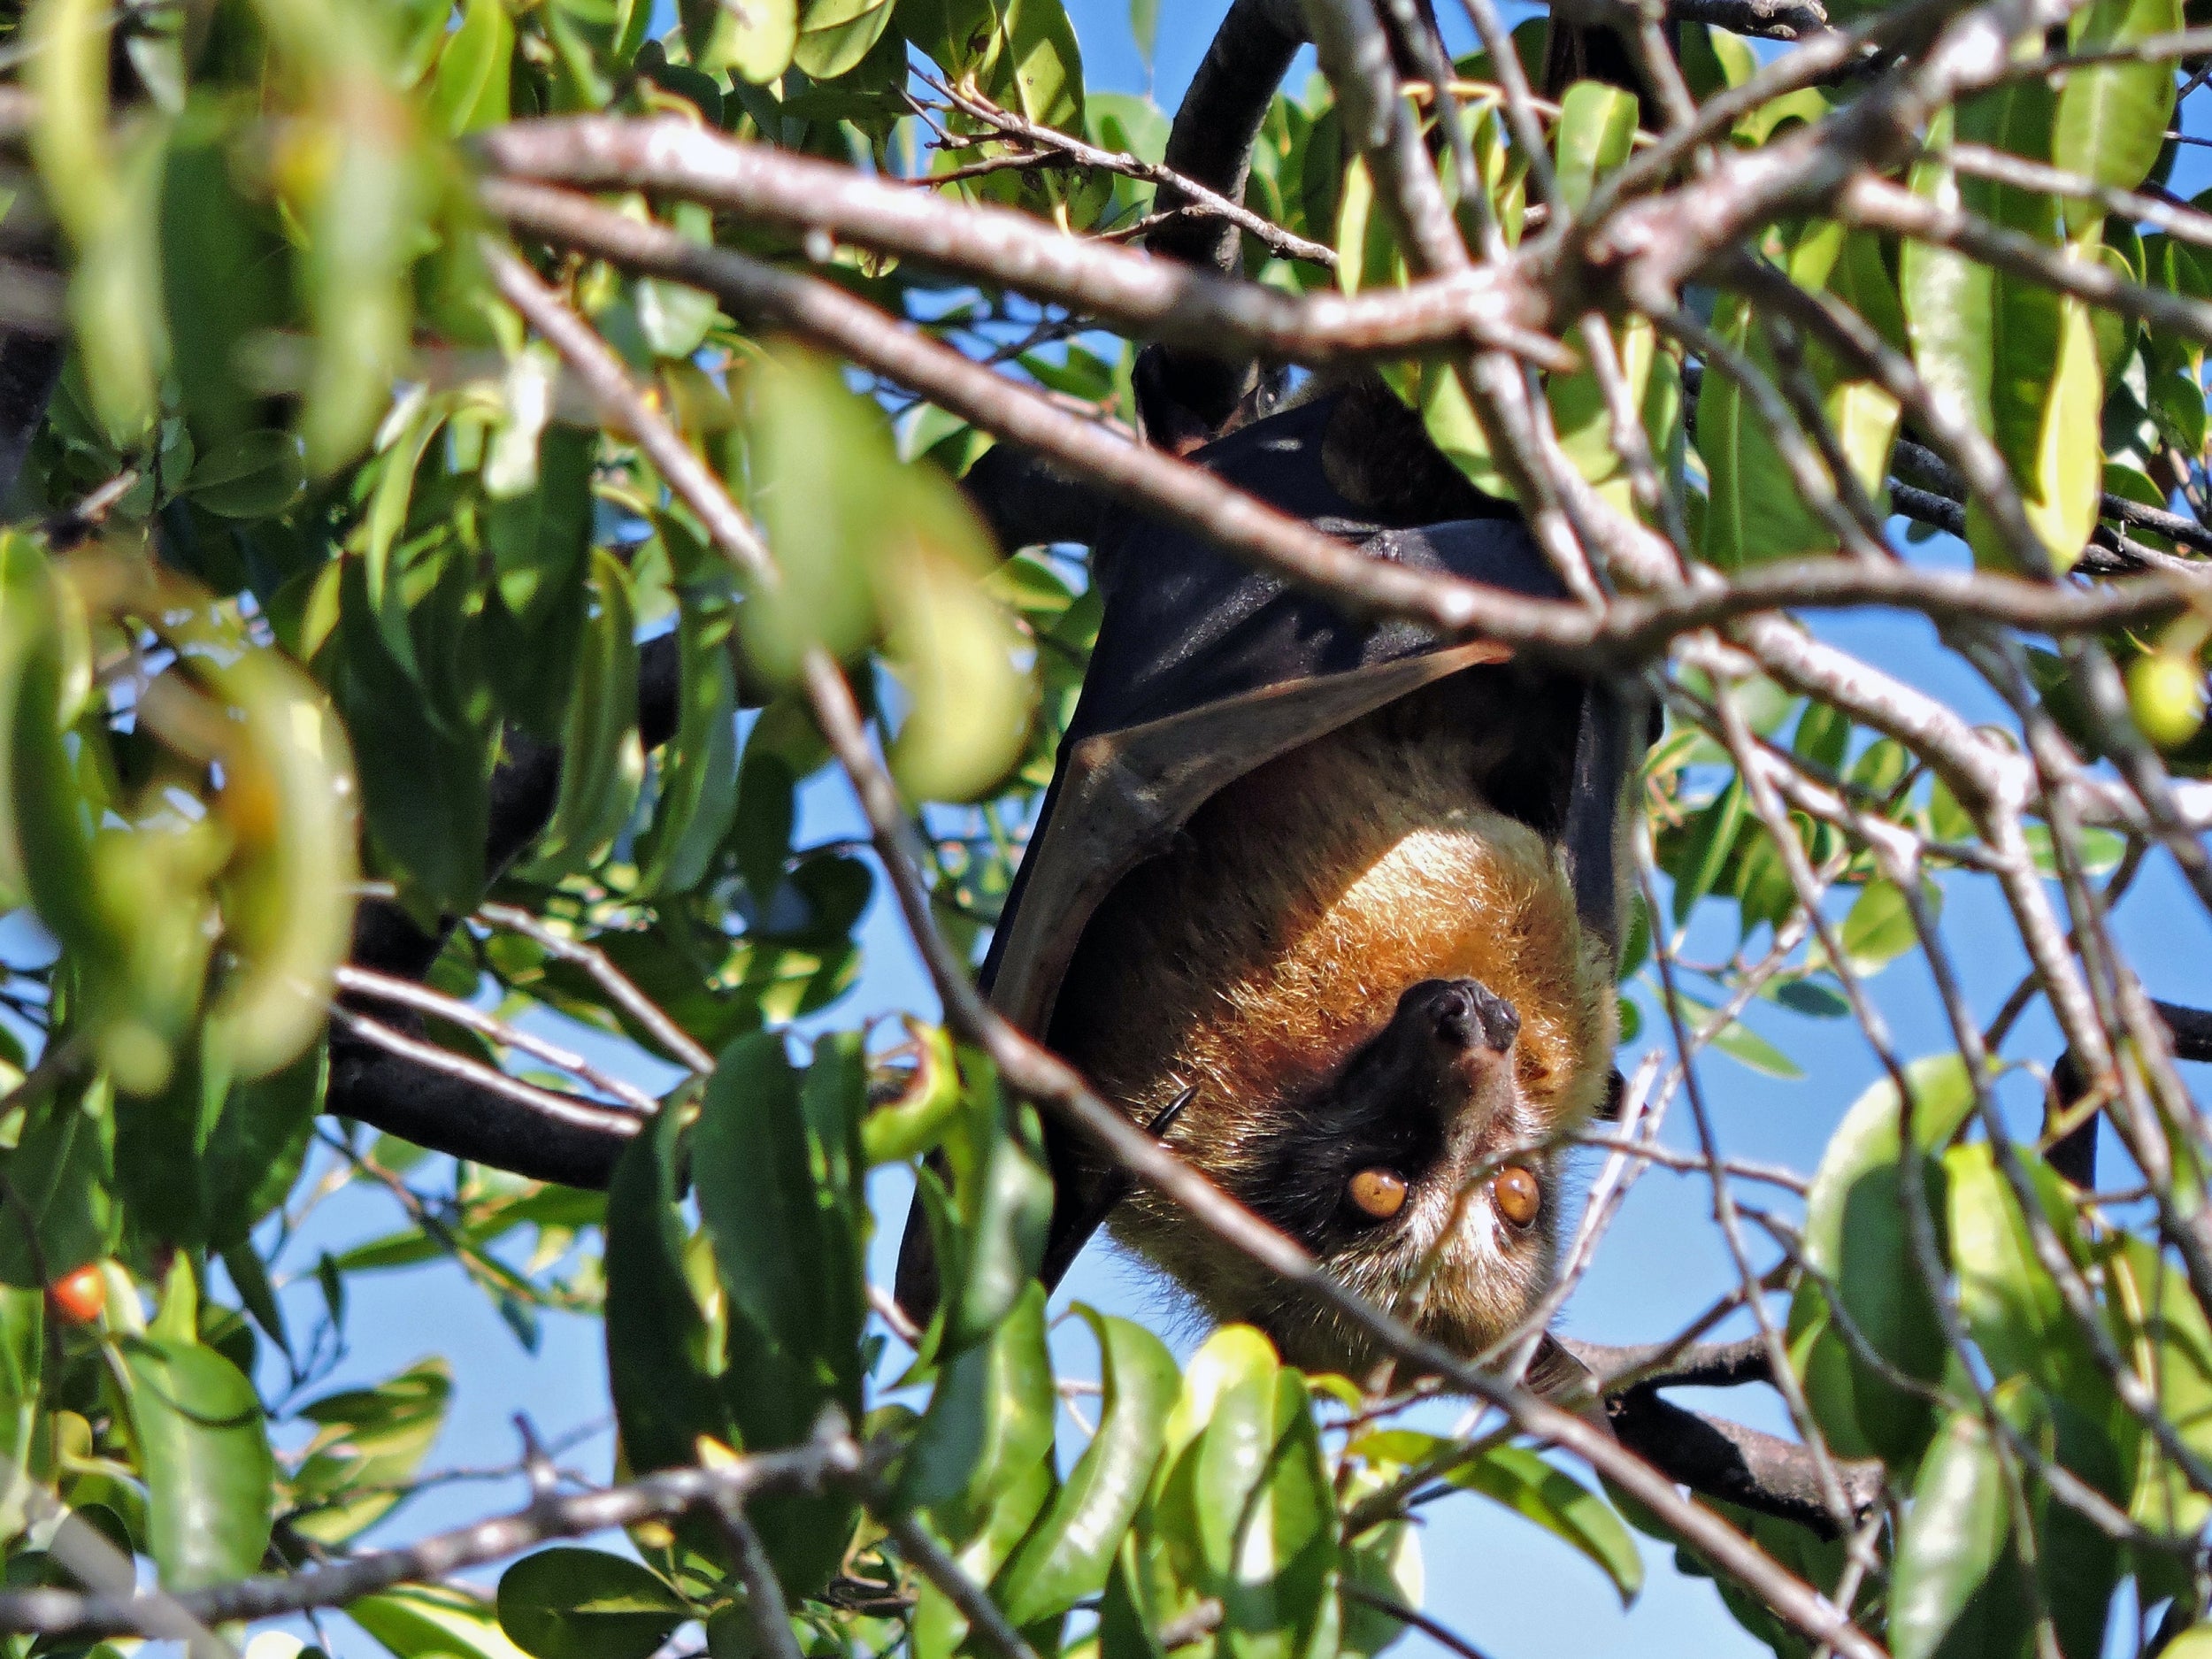 Bats have been shown to pollinate durians in Indonesia